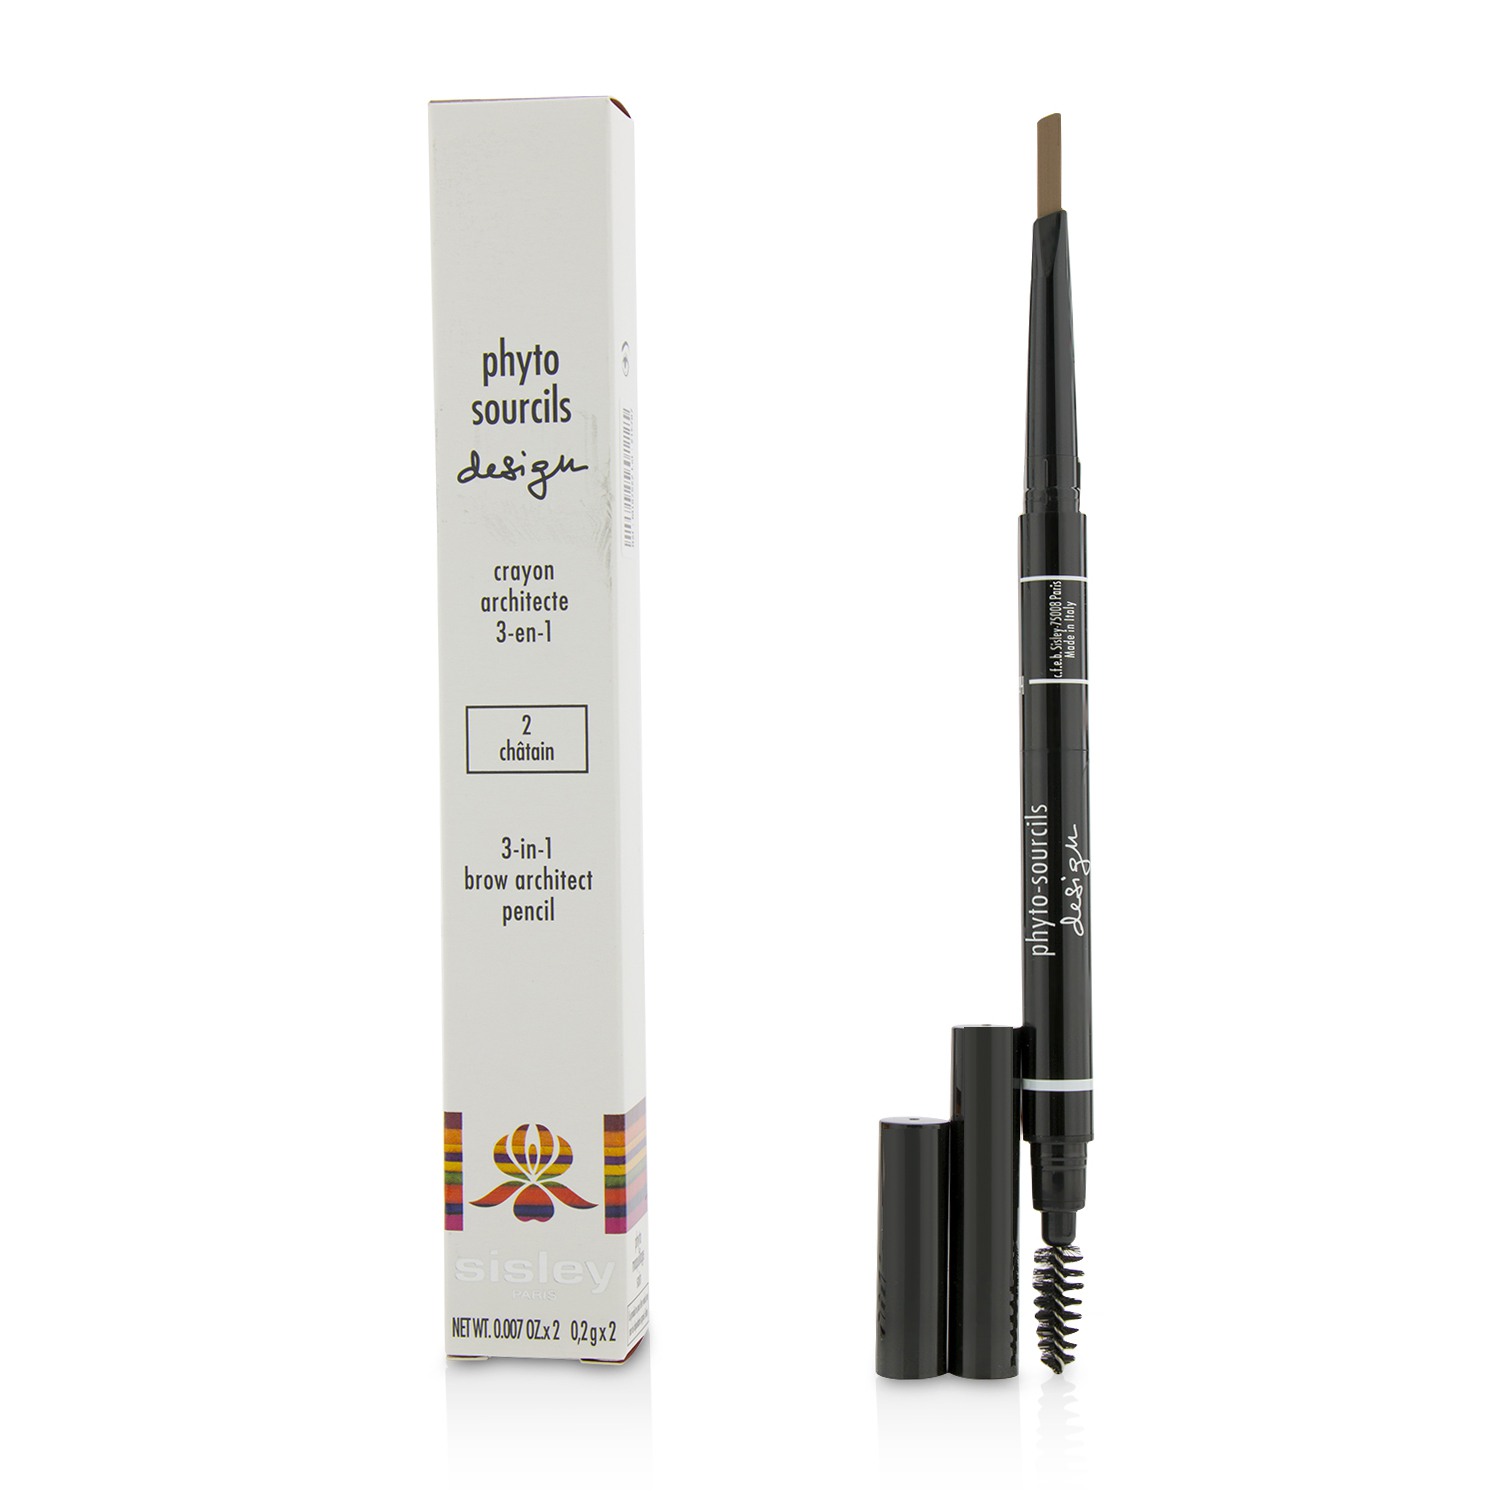 Phyto Sourcils Design 3 In 1 Brow Architect Pencil - # 2 Chatain Sisley Image